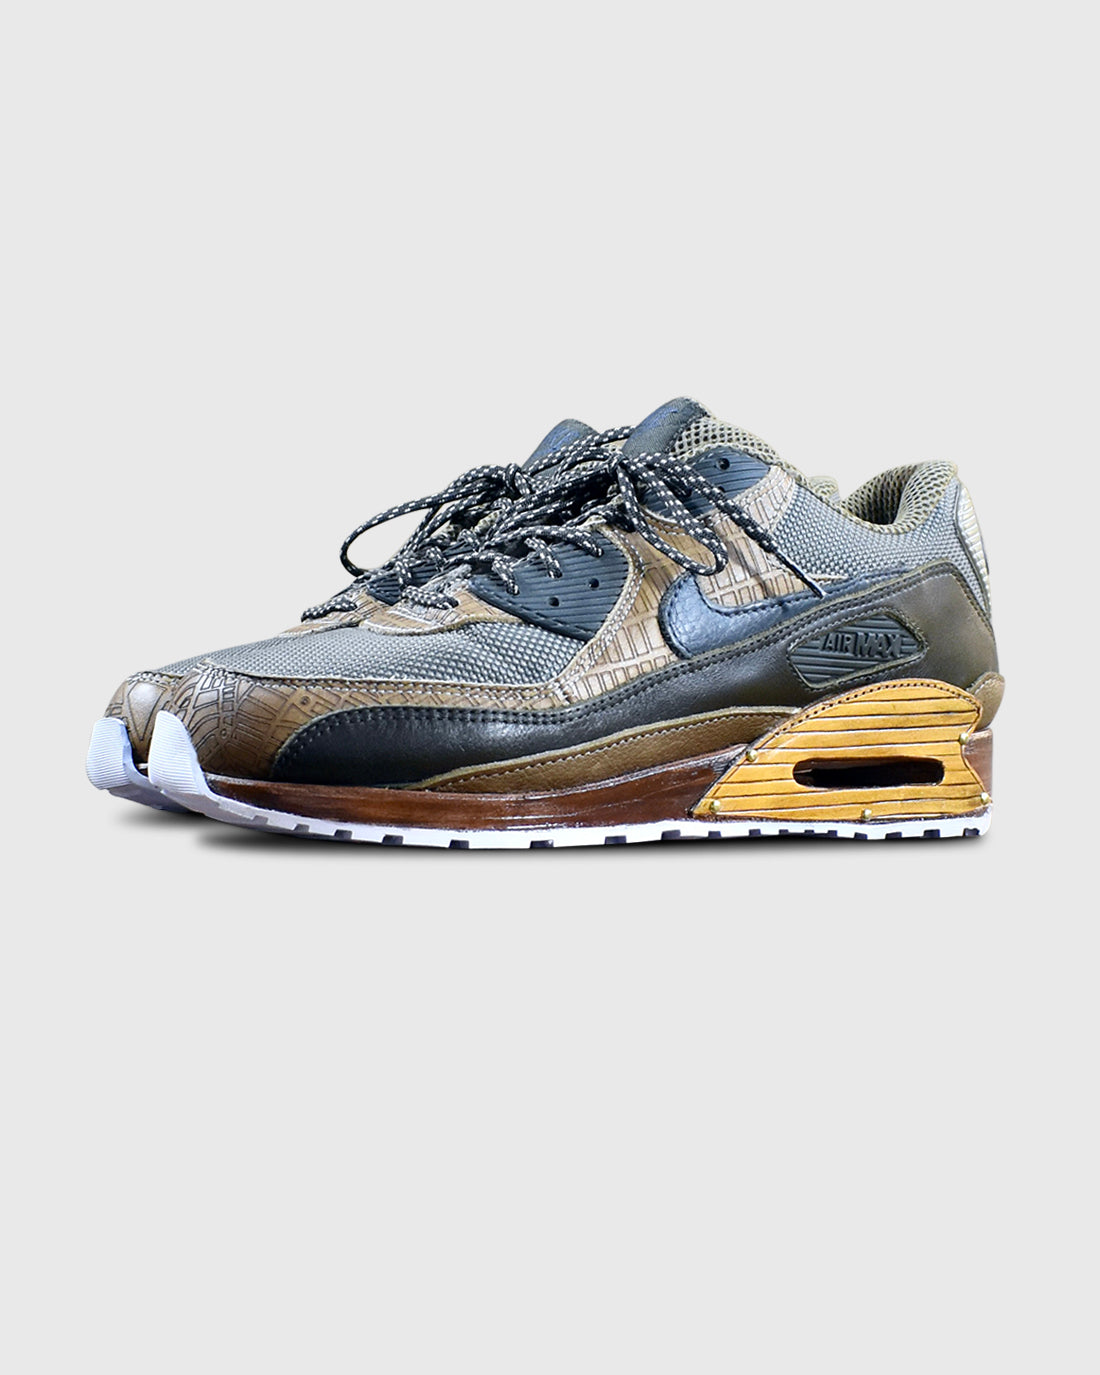 Air Max 90 Leather Stack Re-design